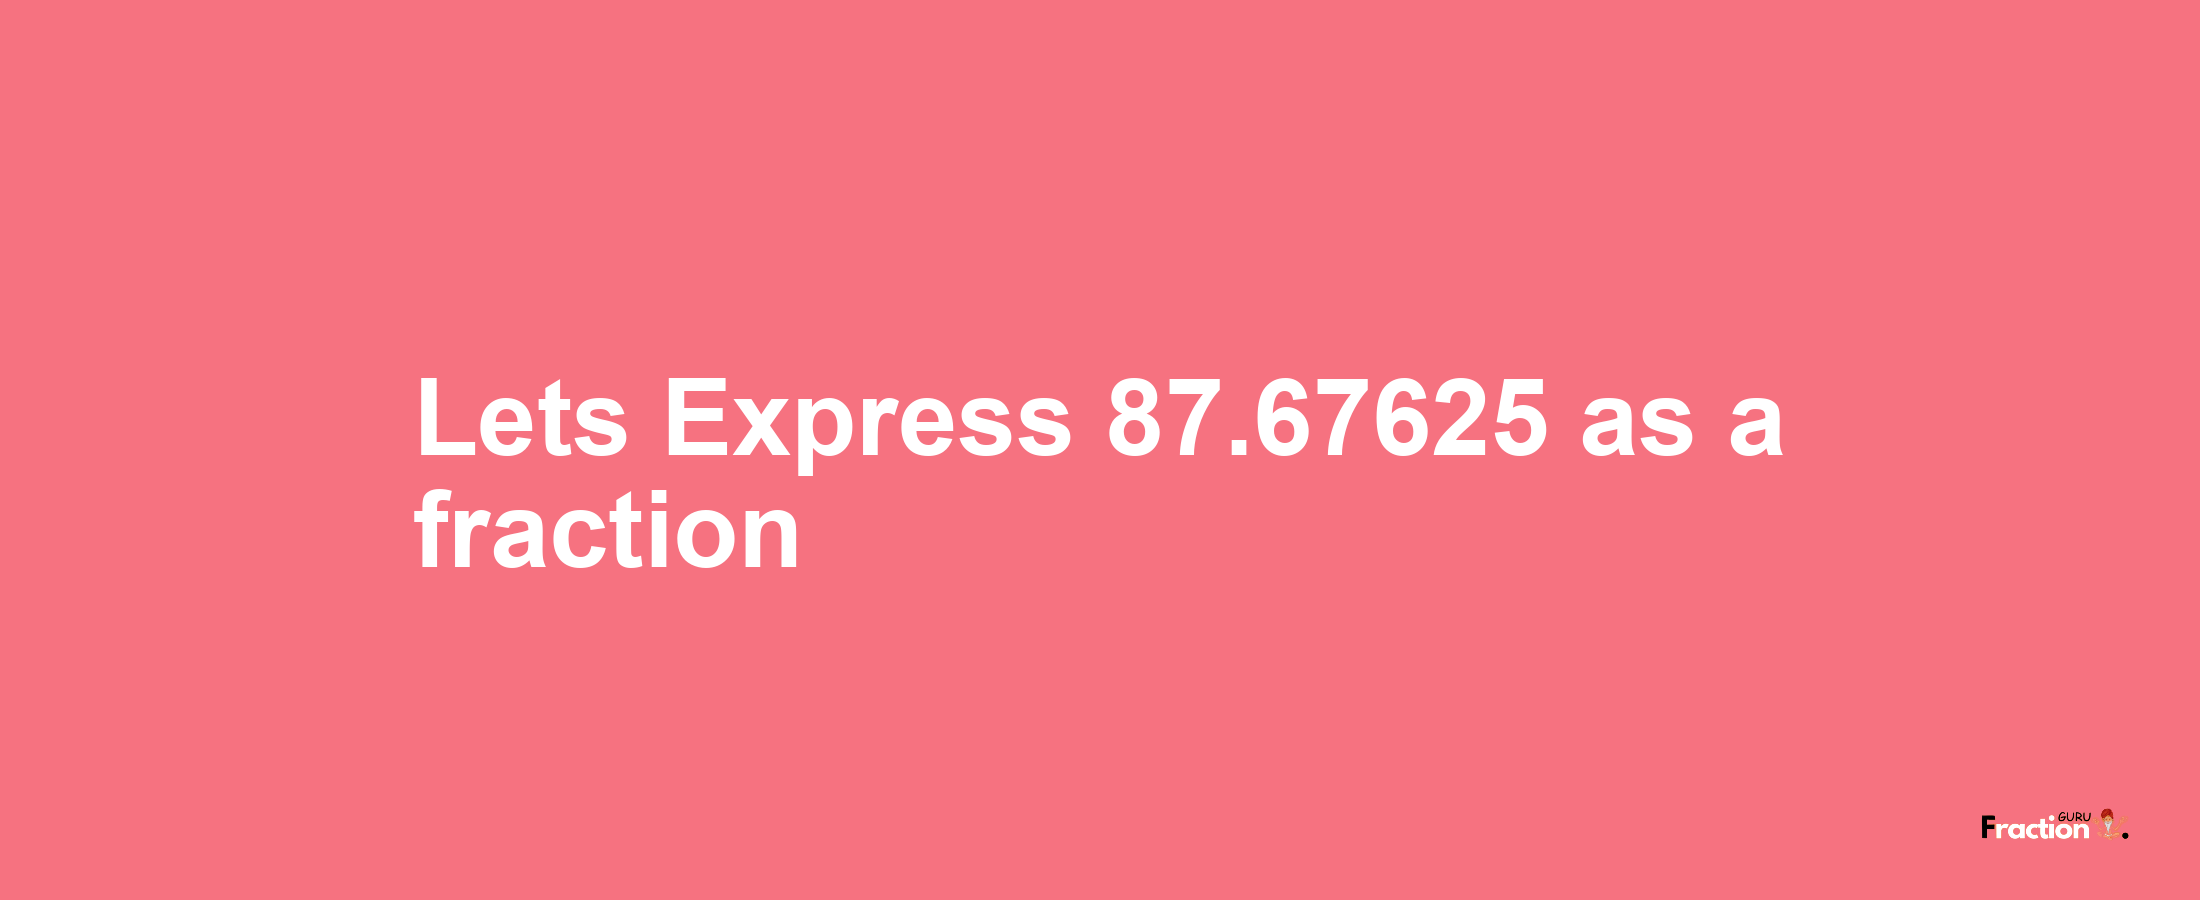 Lets Express 87.67625 as afraction